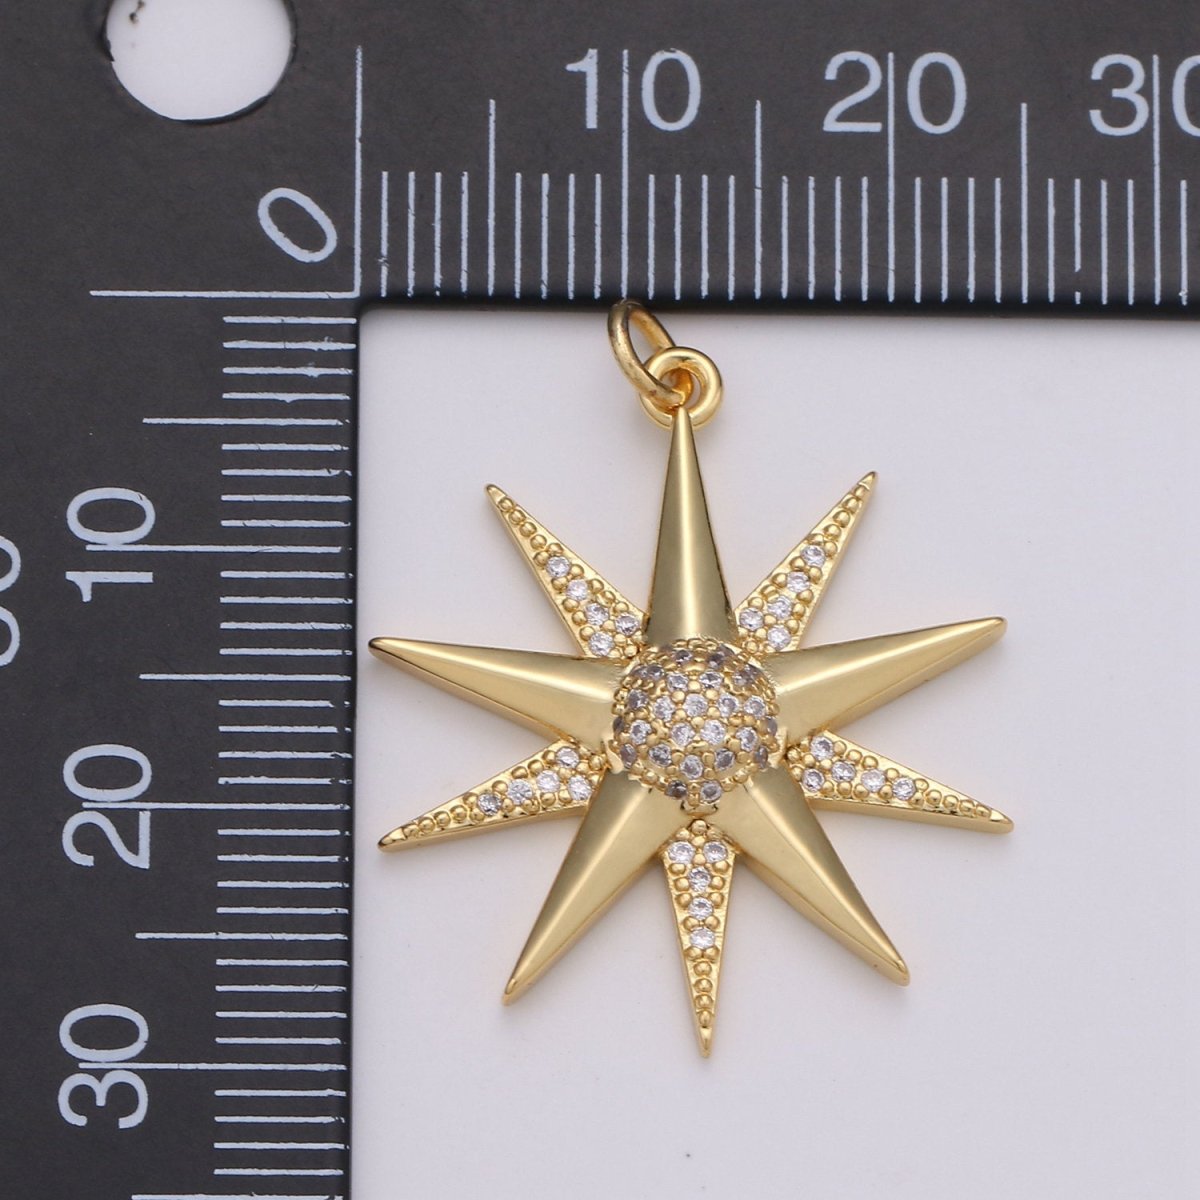 Micro Pave Star Charms, Cubic Zirconia Charms, CZ Charms, Gold Star Charm, Necklace Pendant Bracelet Charms Silver Star Celestial Jewelry D-475 D-587 - DLUXCA